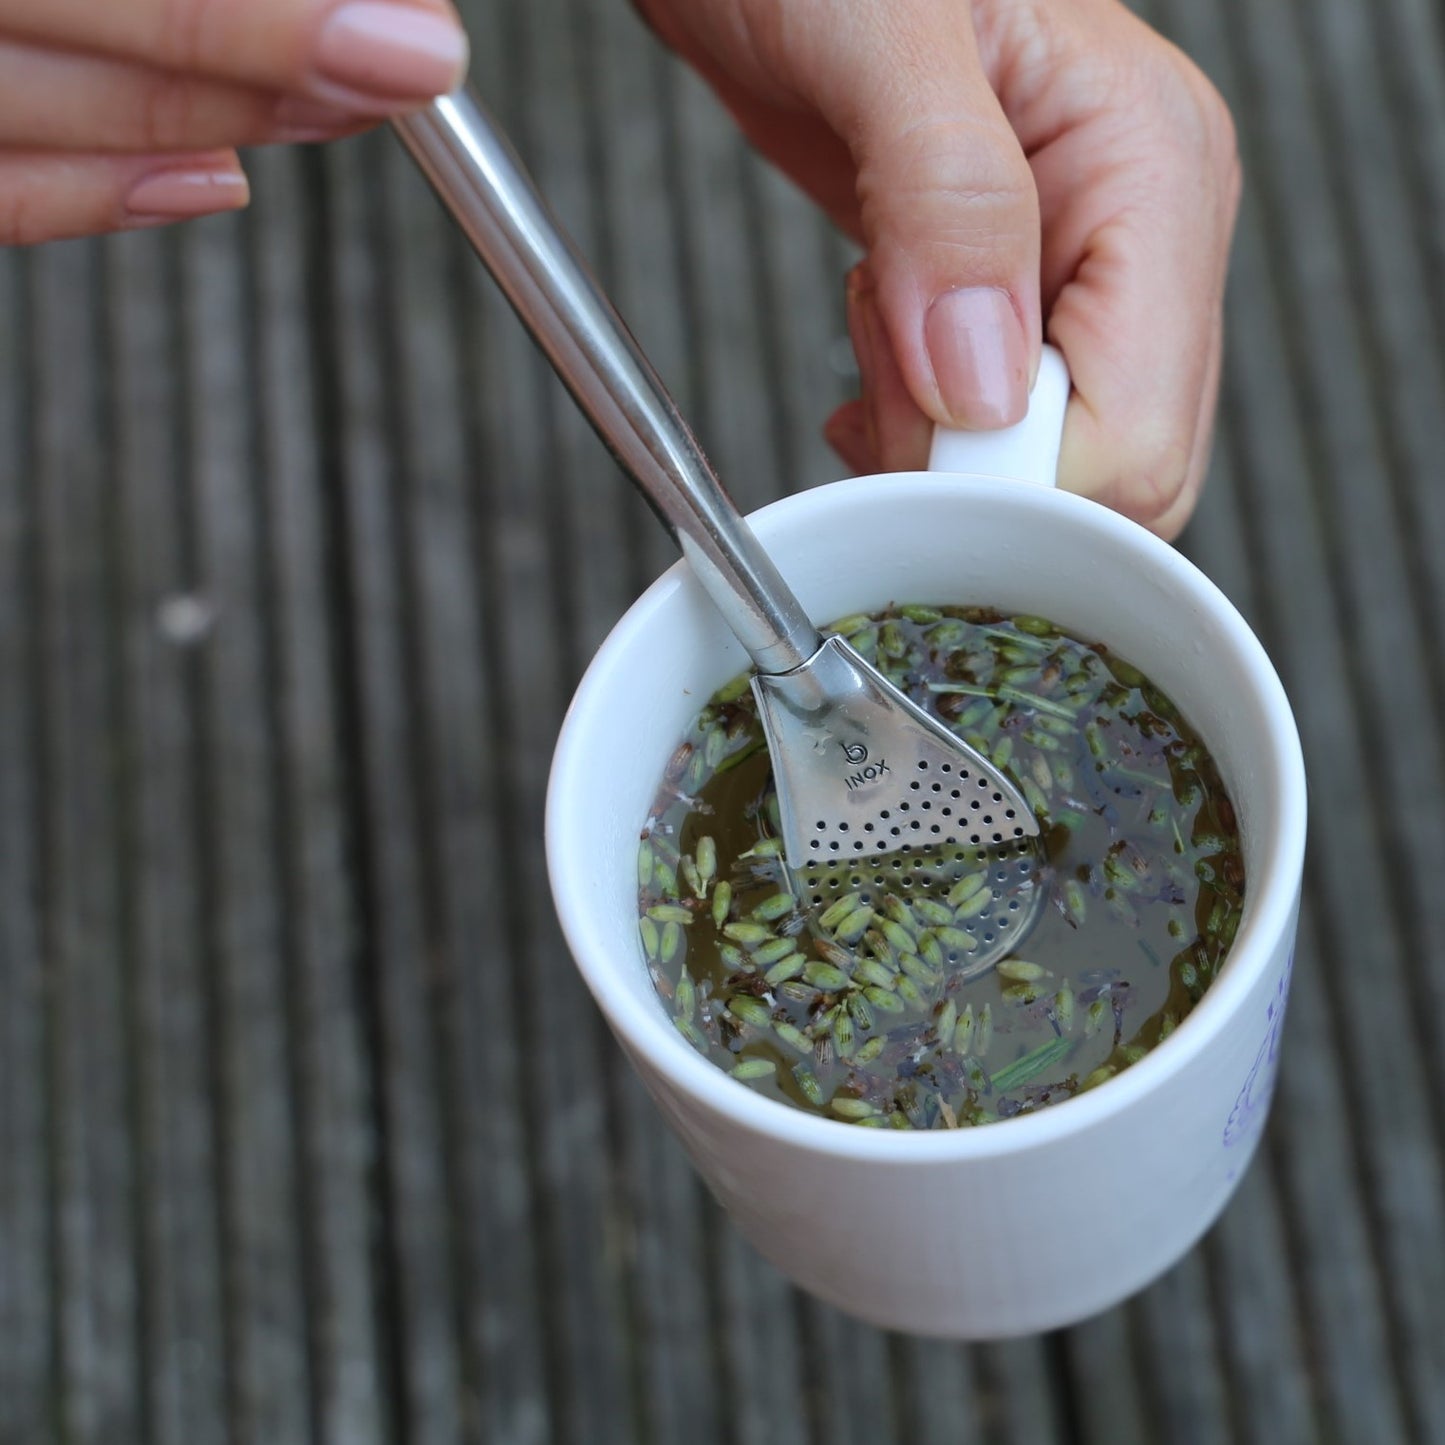 tea straw and strainer made of stainless steel being used for a lavanda tea